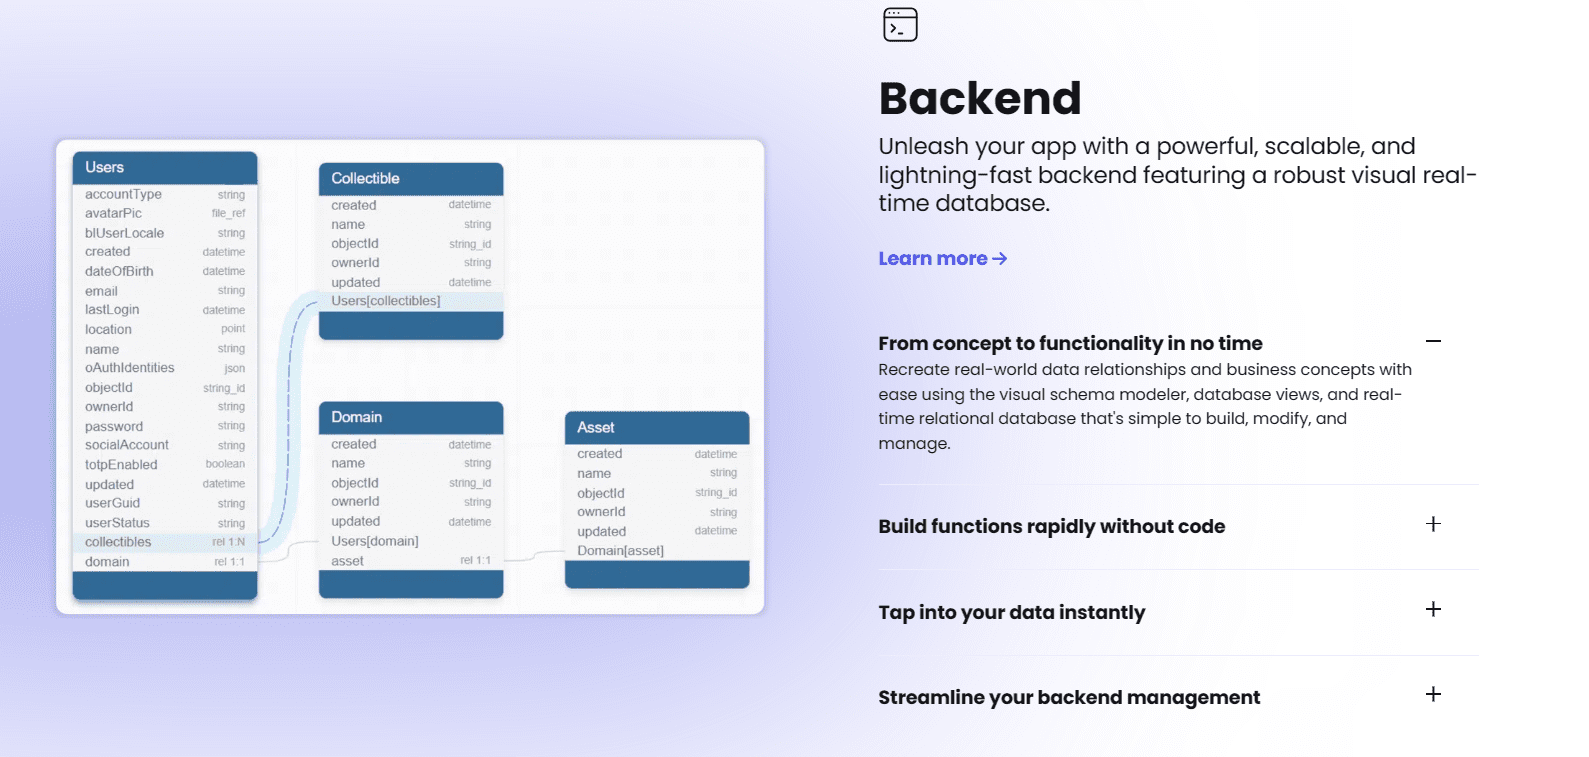 backendless homepage to show how to create backend for an app without code